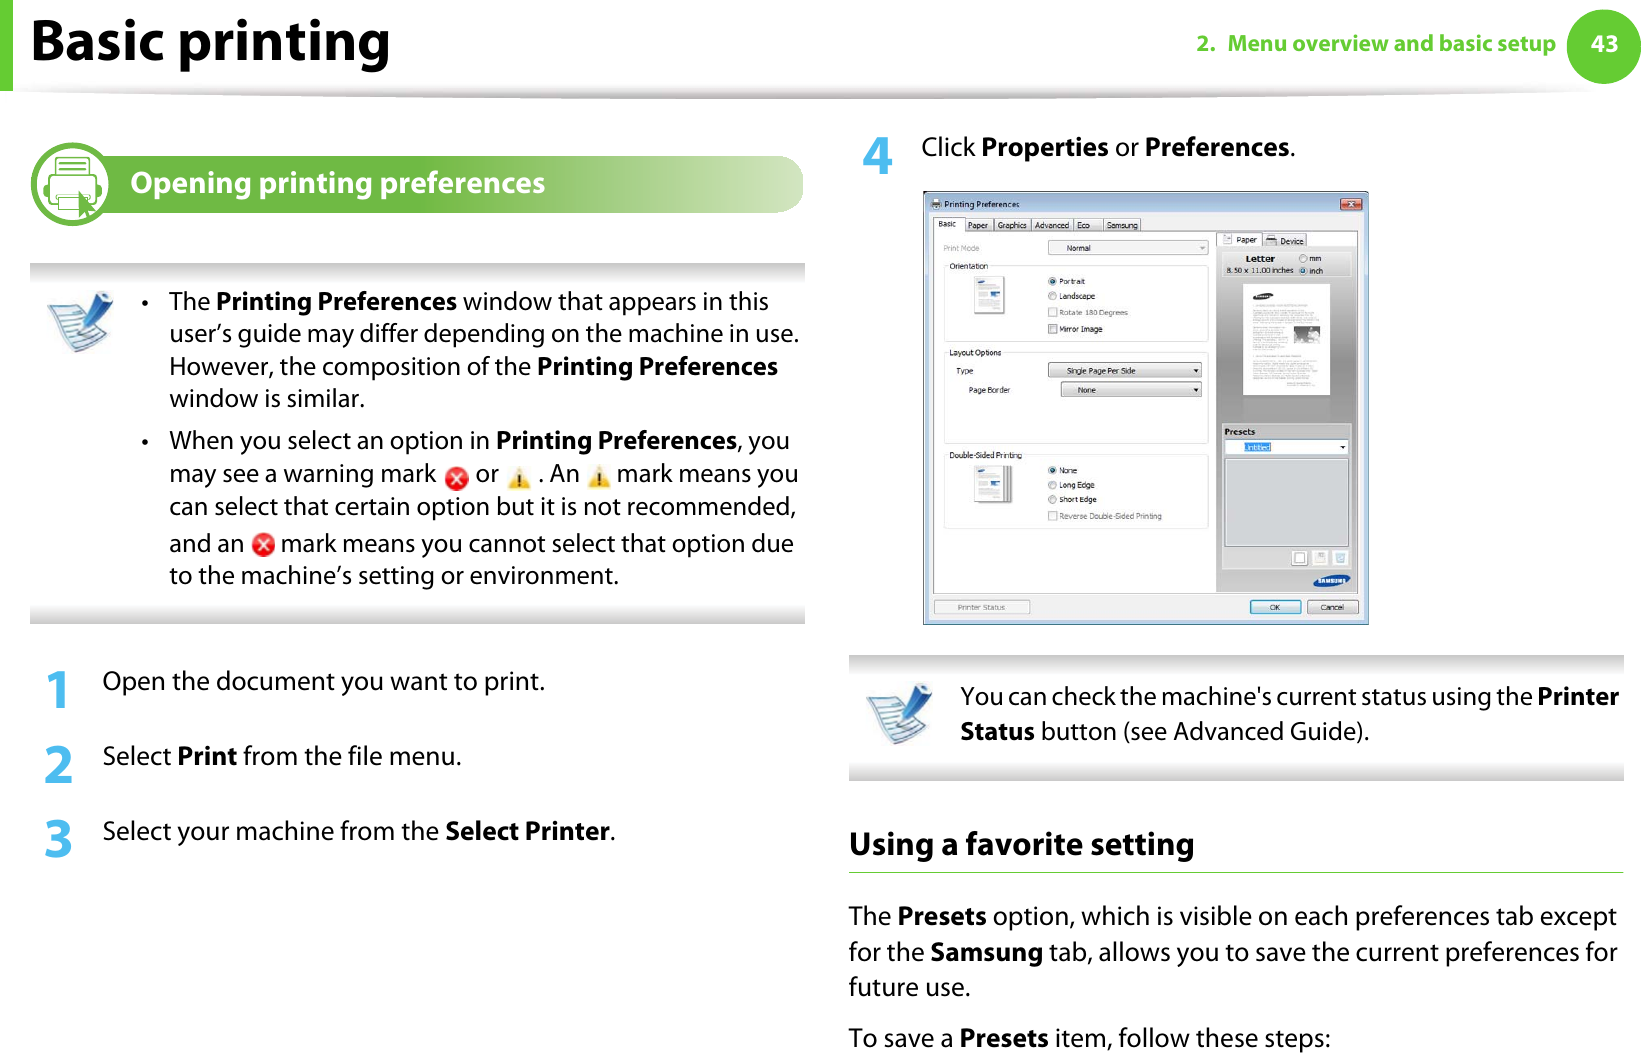 Basic printing 432. Menu overview and basic setup8Opening printing preferences •The Printing Preferences window that appears in this user’s guide may differ depending on the machine in use. However, the composition of the Printing Preferences window is similar.• When you select an option in Printing Preferences, you may see a warning mark   or   . An   mark means you can select that certain option but it is not recommended, and an   mark means you cannot select that option due to the machine’s setting or environment. 1Open the document you want to print.2  Select Print from the file menu.3  Select your machine from the Select Printer. 4  Click Properties or Preferences.  You can check the machine&apos;s current status using the Printer Status button (see Advanced Guide). Using a favorite settingThe Presets option, which is visible on each preferences tab except for the Samsung tab, allows you to save the current preferences for future use.To save a Presets item, follow these steps: